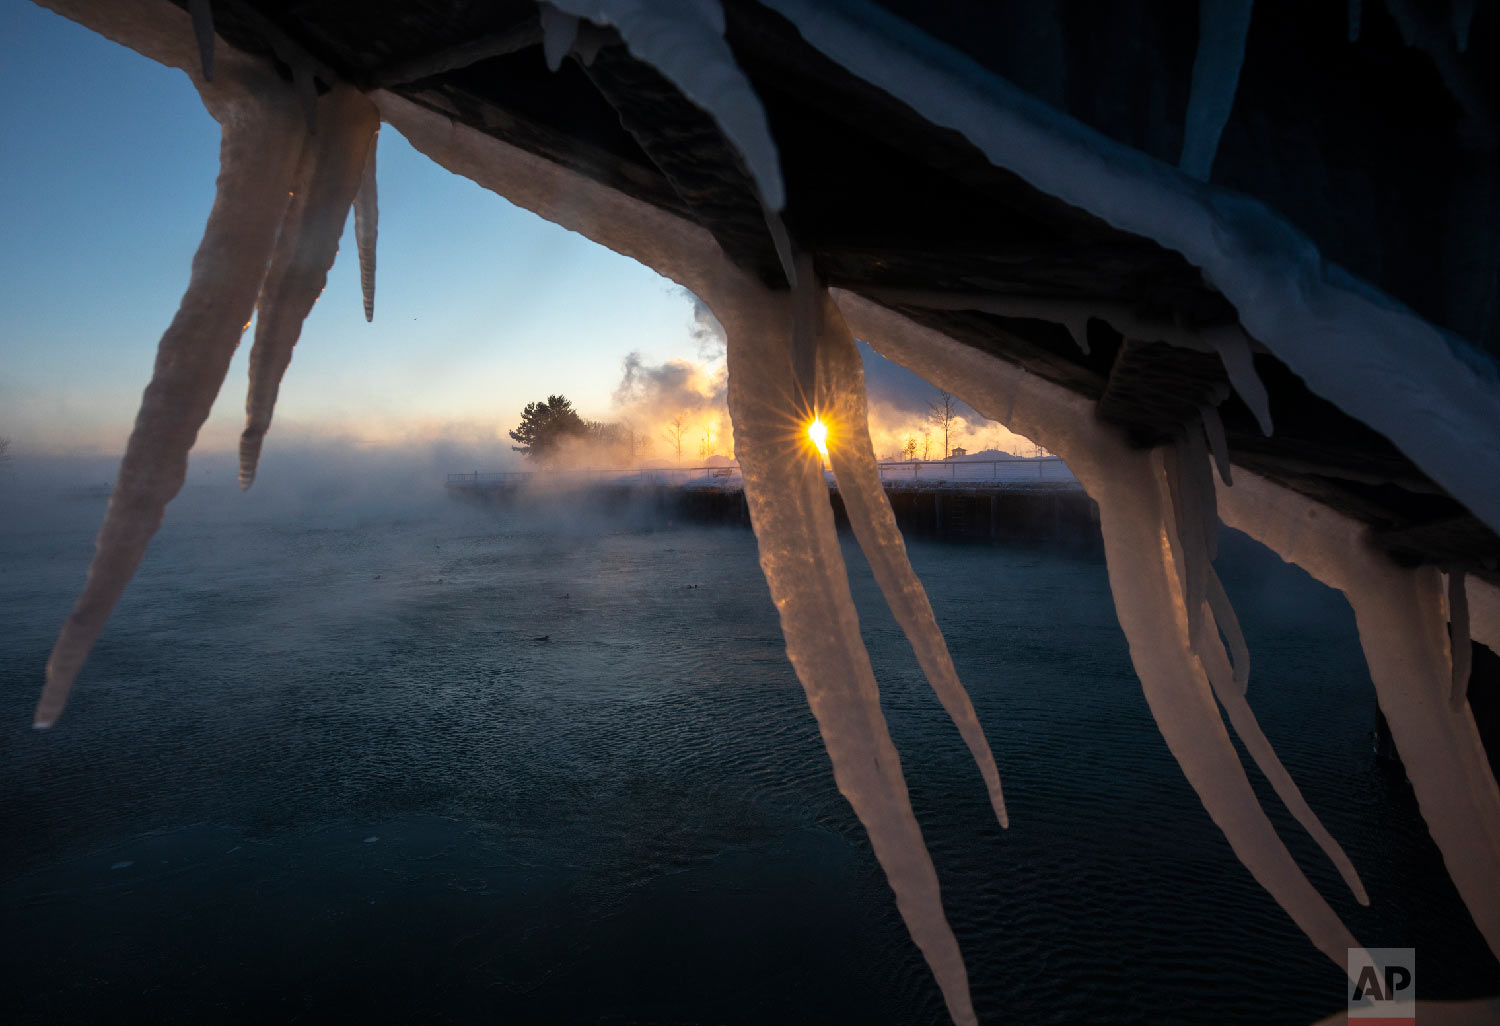  The sun rises behind icicles formed on the harbor in Port Washington, Wis., on Wednesday, Jan. 30, 2019. (AP Photo/Jeffrey Phelps) 